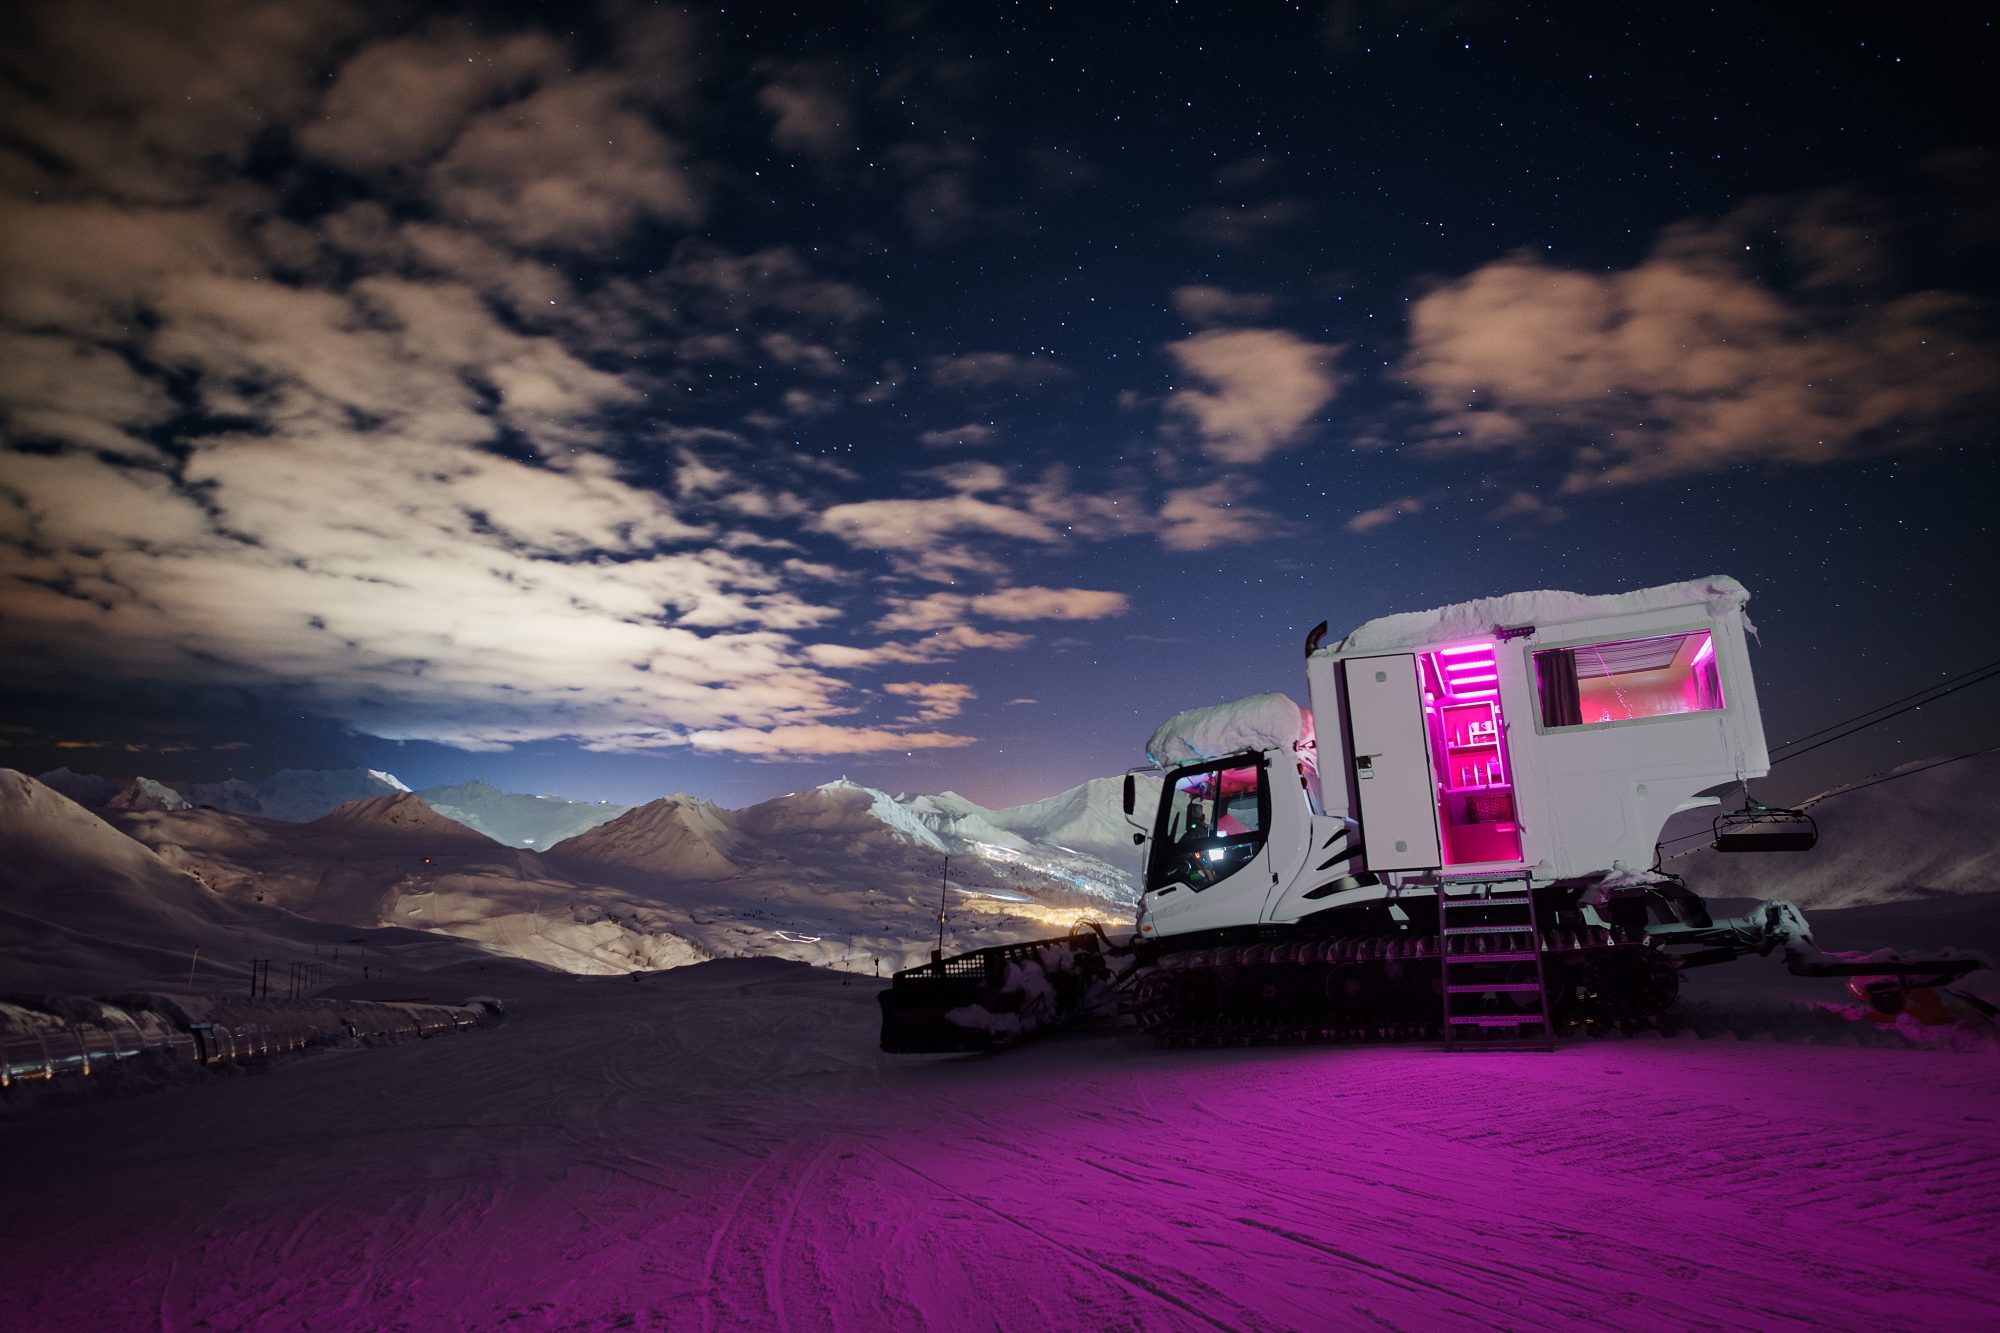 The Over the Moon experience - sleep in a converted snowcat high above the mountain. What is new at La Plagne for the 2018 – 19 ski-season.